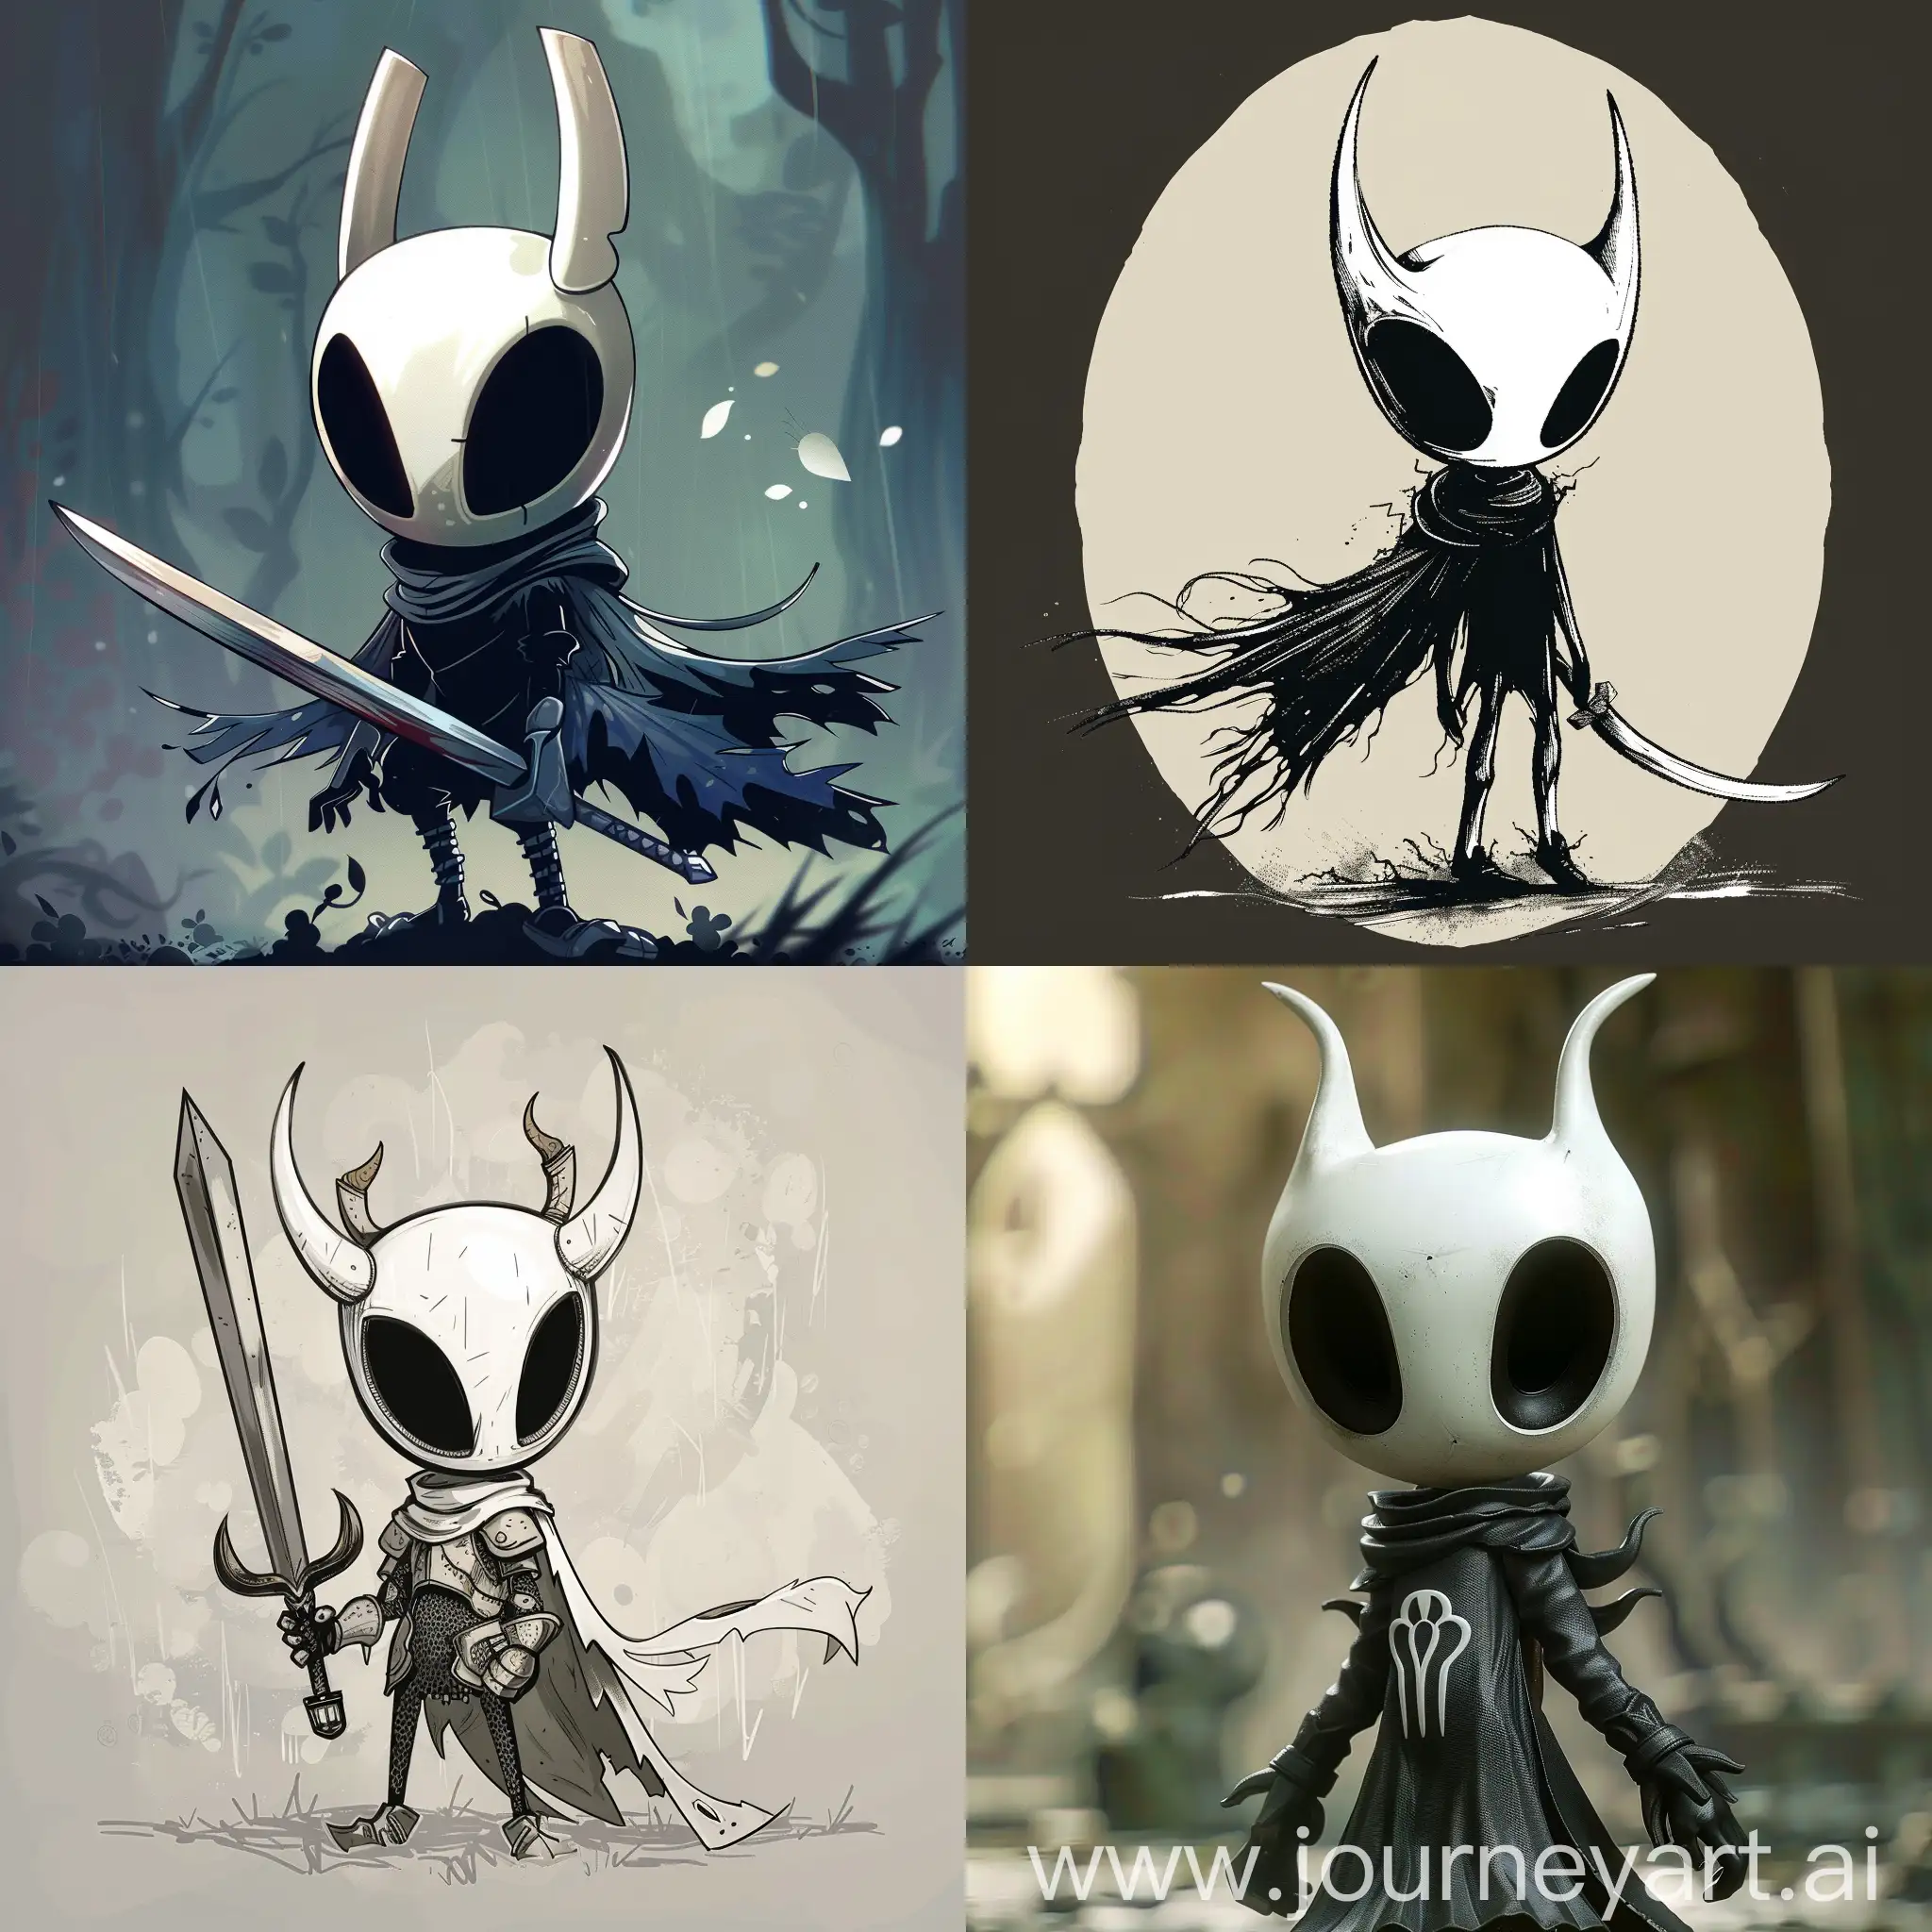 Adventurous-Stereotypical-Hollow-Knight-Player-Exploring-Mysterious-Caverns